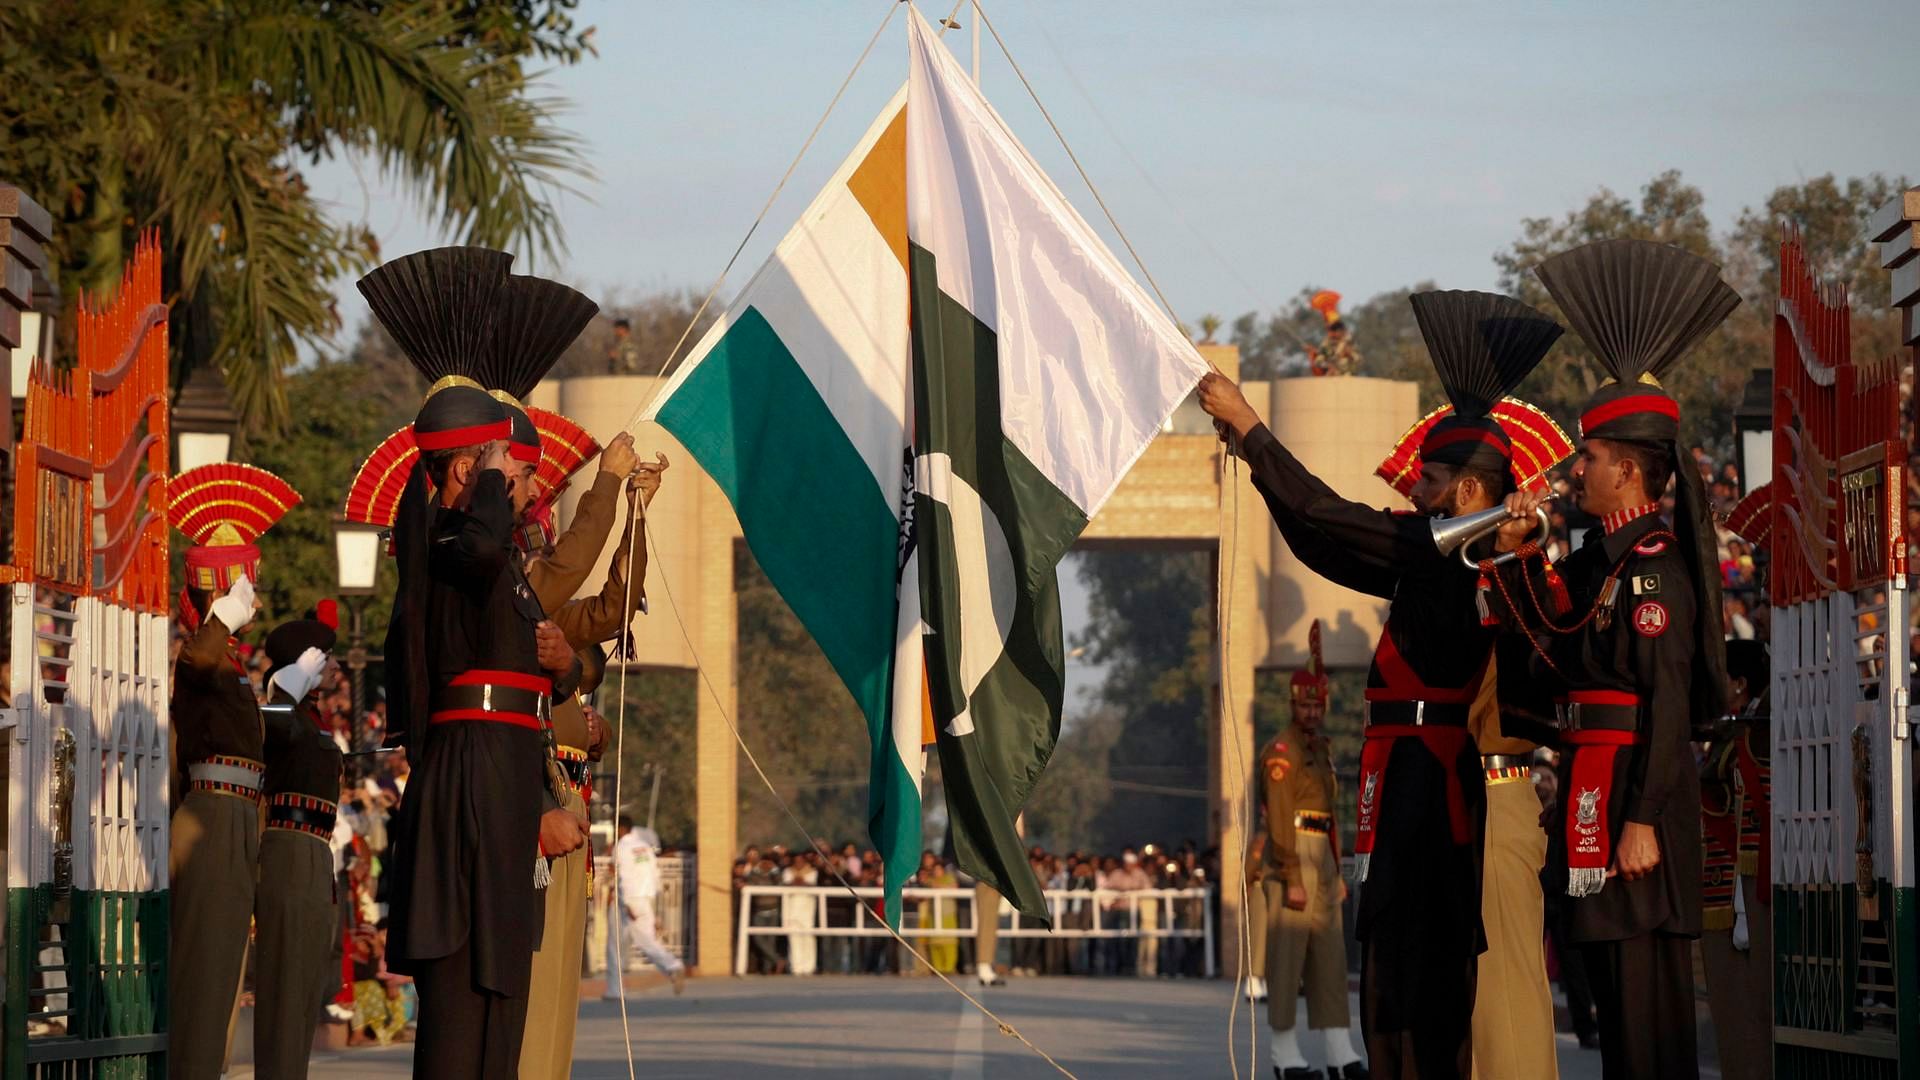 Wagah border. Image used for representational purposes only.